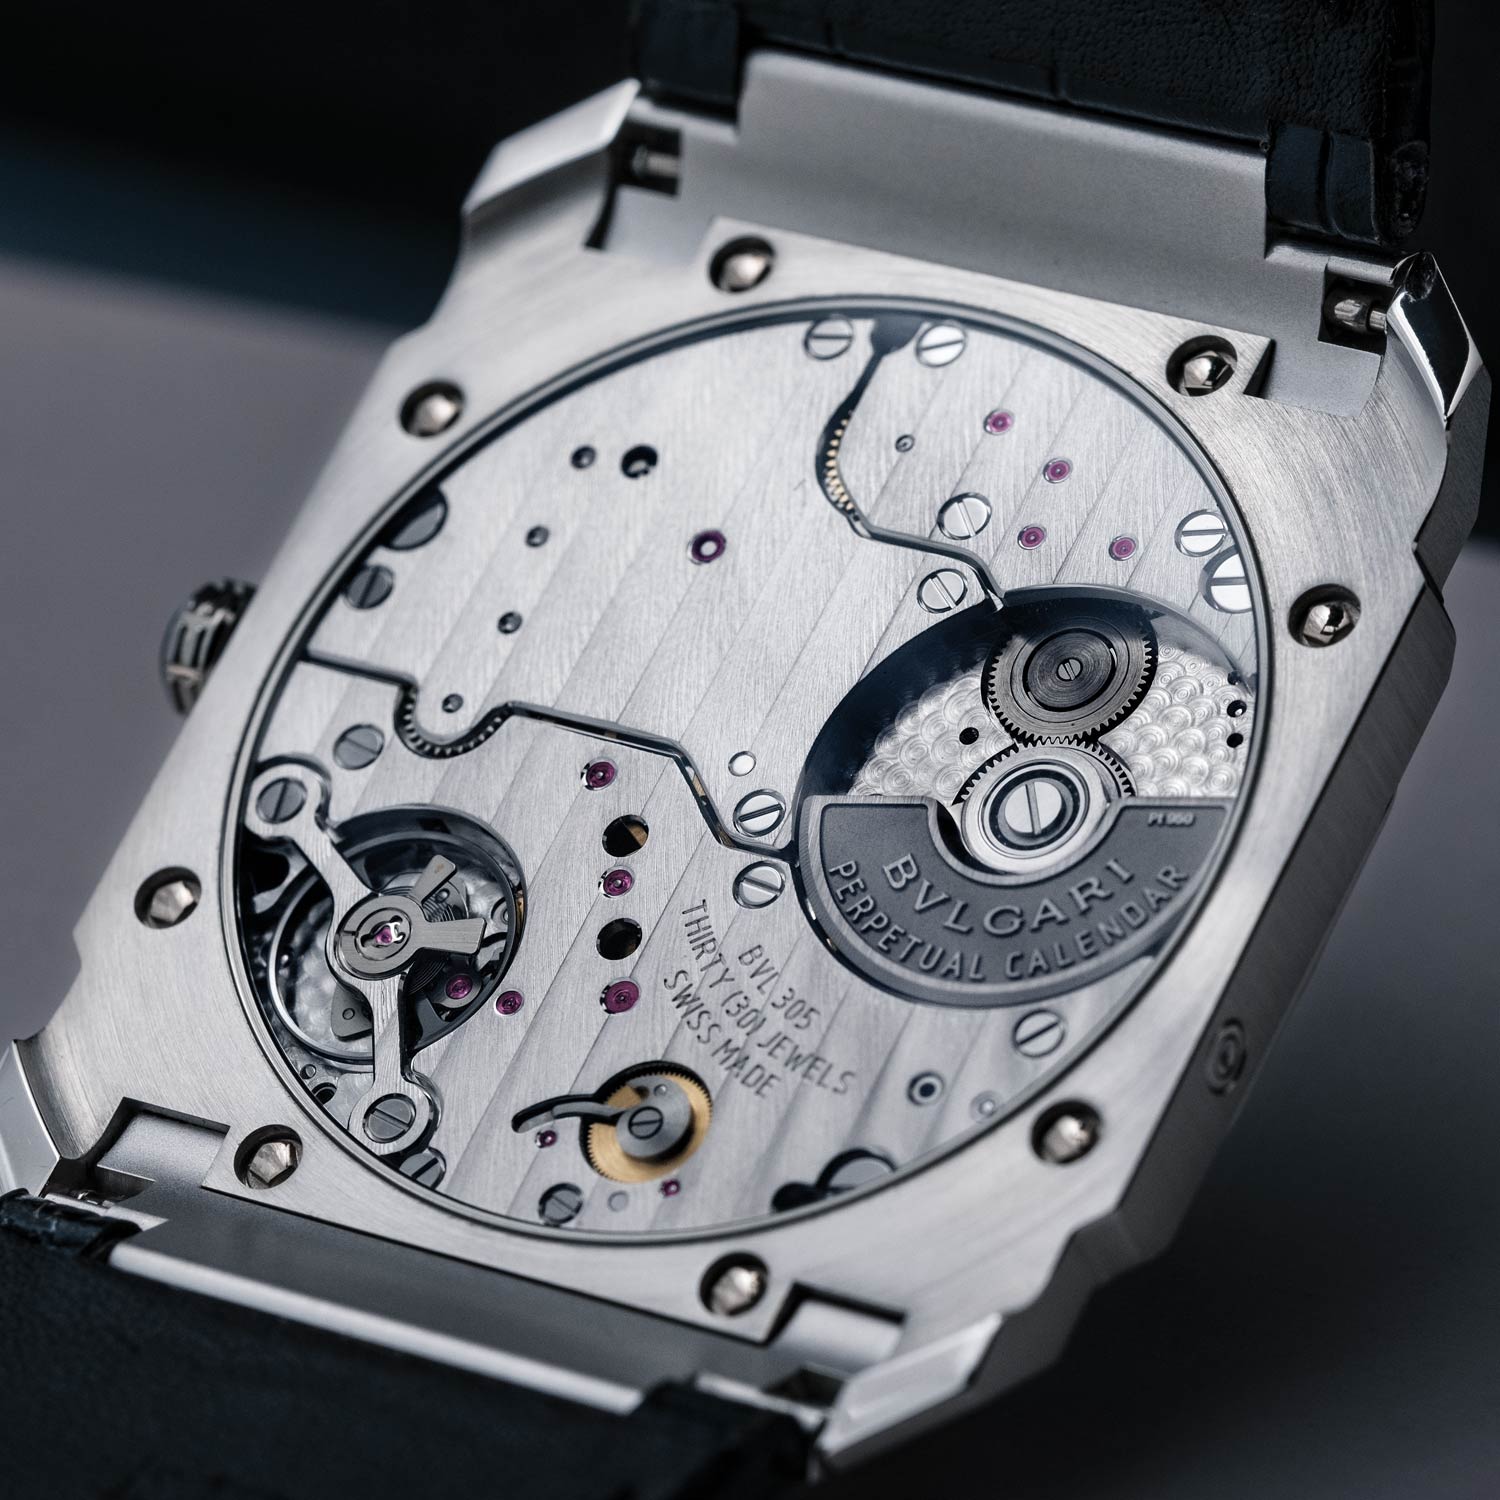 The laser engraved platinum rotor has a matte sandblasted type finish applied to it, leaving the polished words “PERPETUAL CALENDAR” to stand out in sharp relief